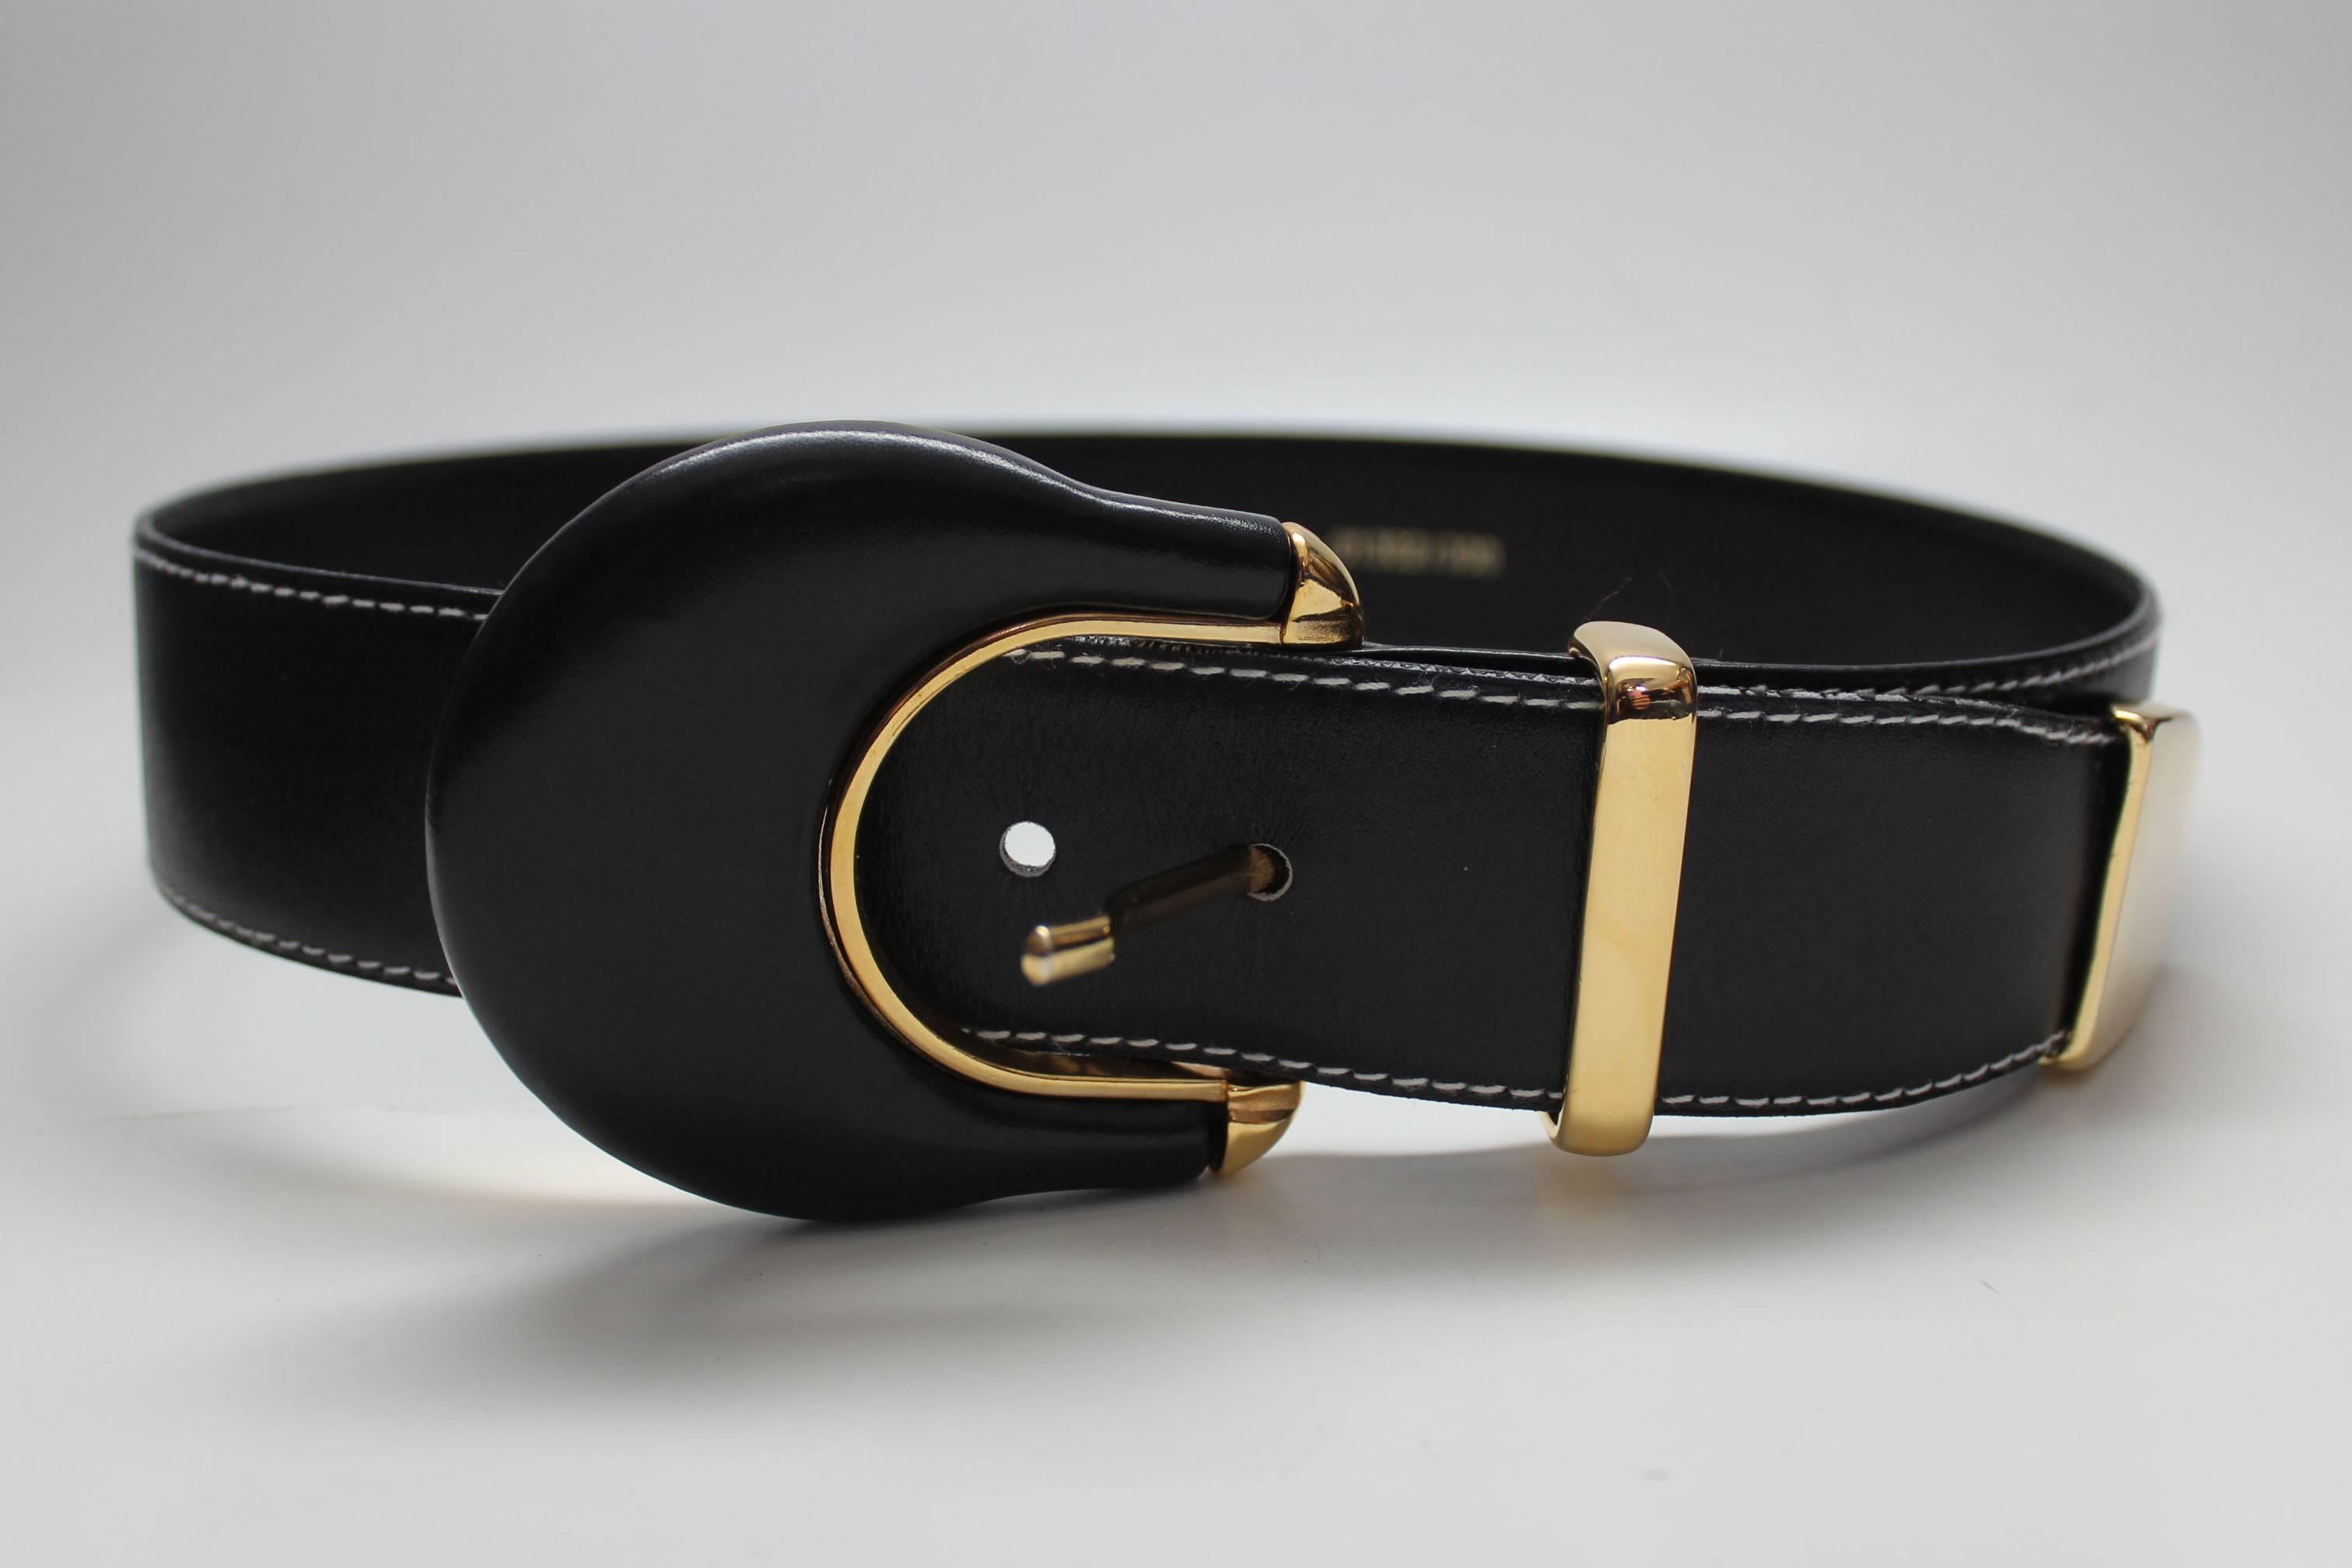 Vintage 1980's navy blue leather belt by Escada with bold gold tone hardware.
Marked as size 34, fits a 25-27